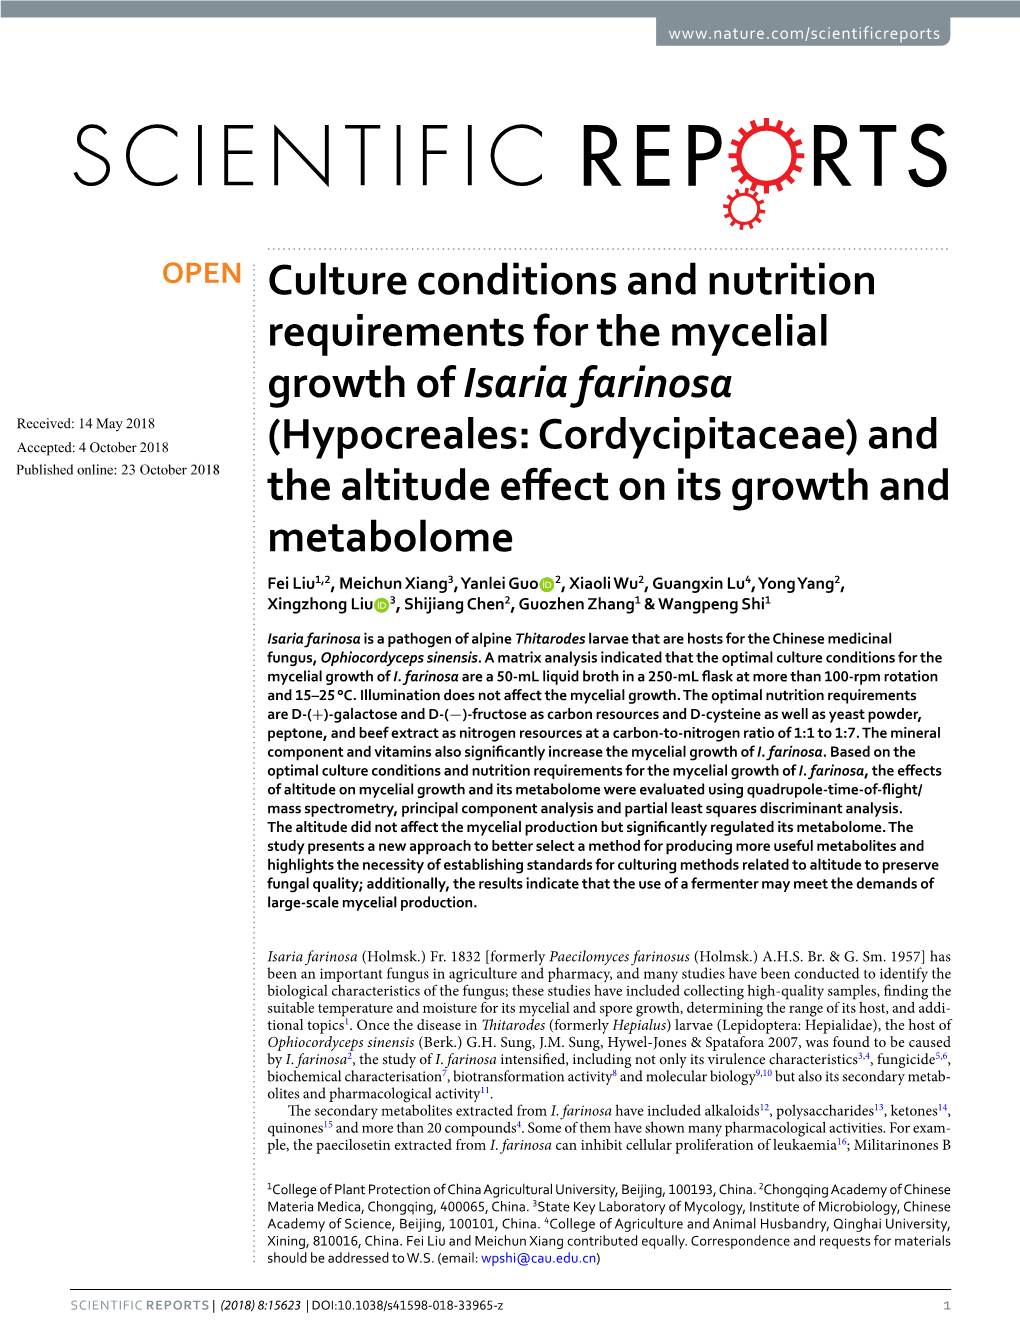 Culture Conditions and Nutrition Requirements for the Mycelial